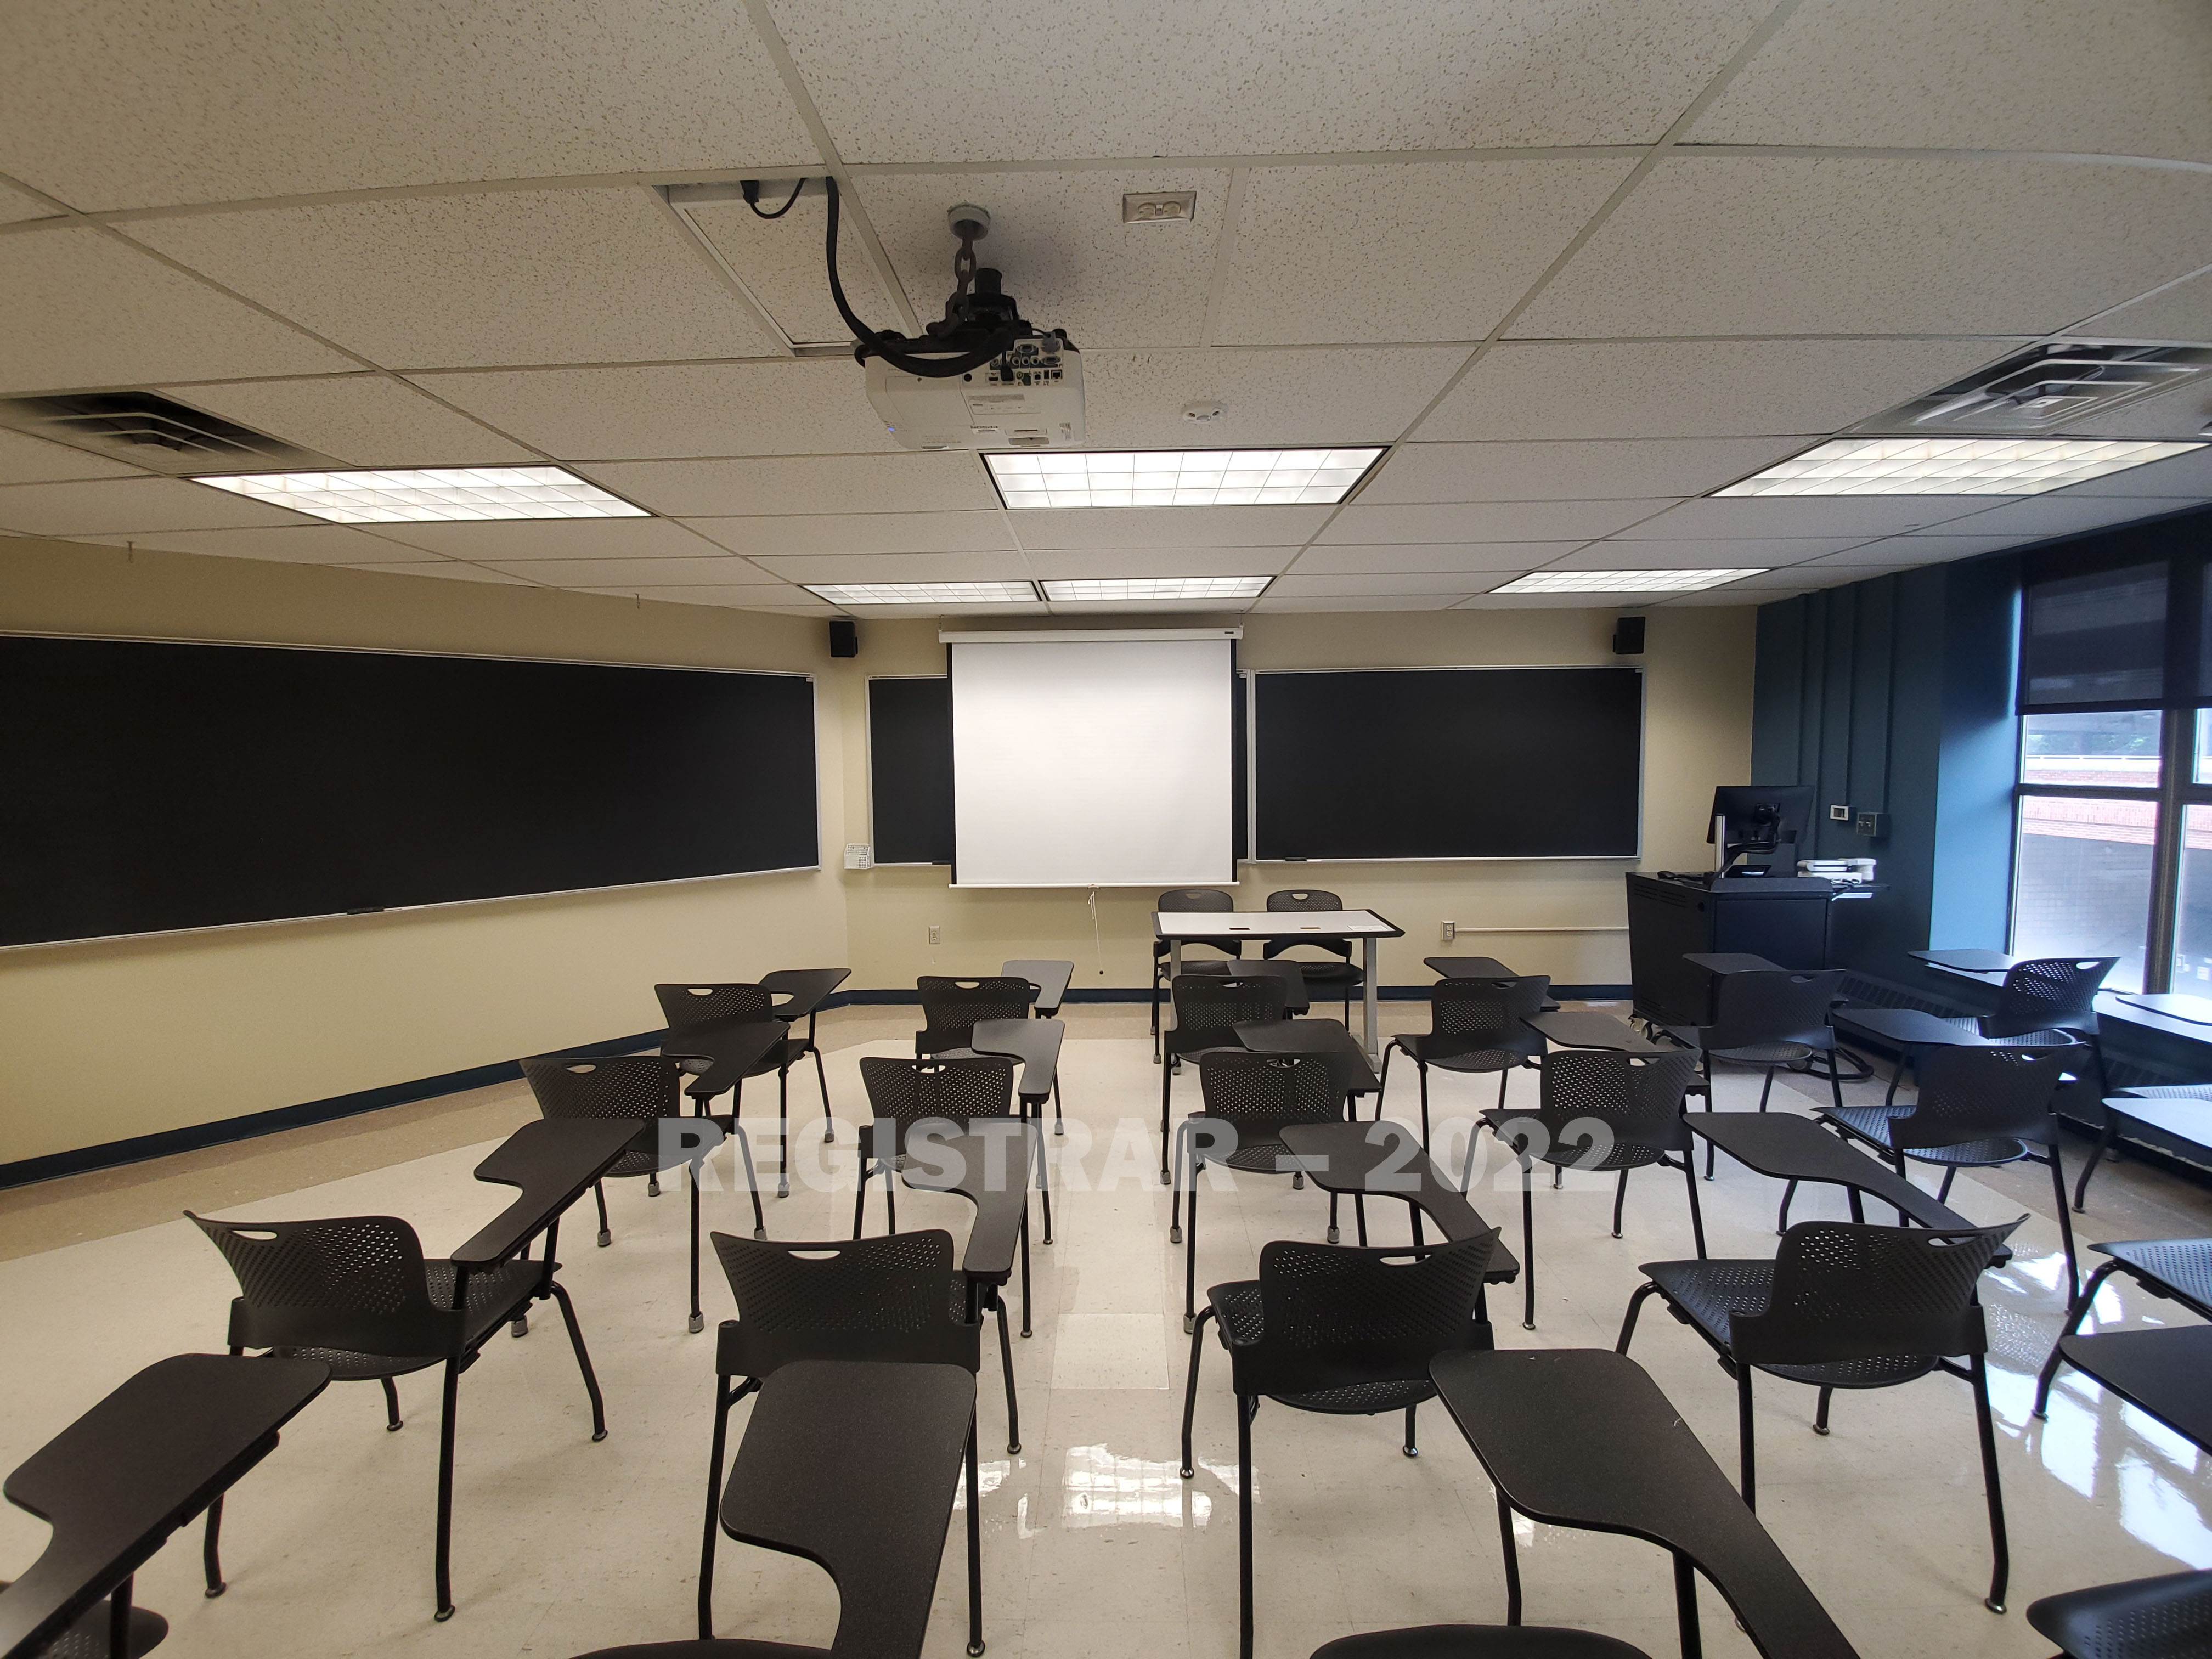 Enarson Classroom Building room 230 ultra wide angle view from the back of the room with projector screen down